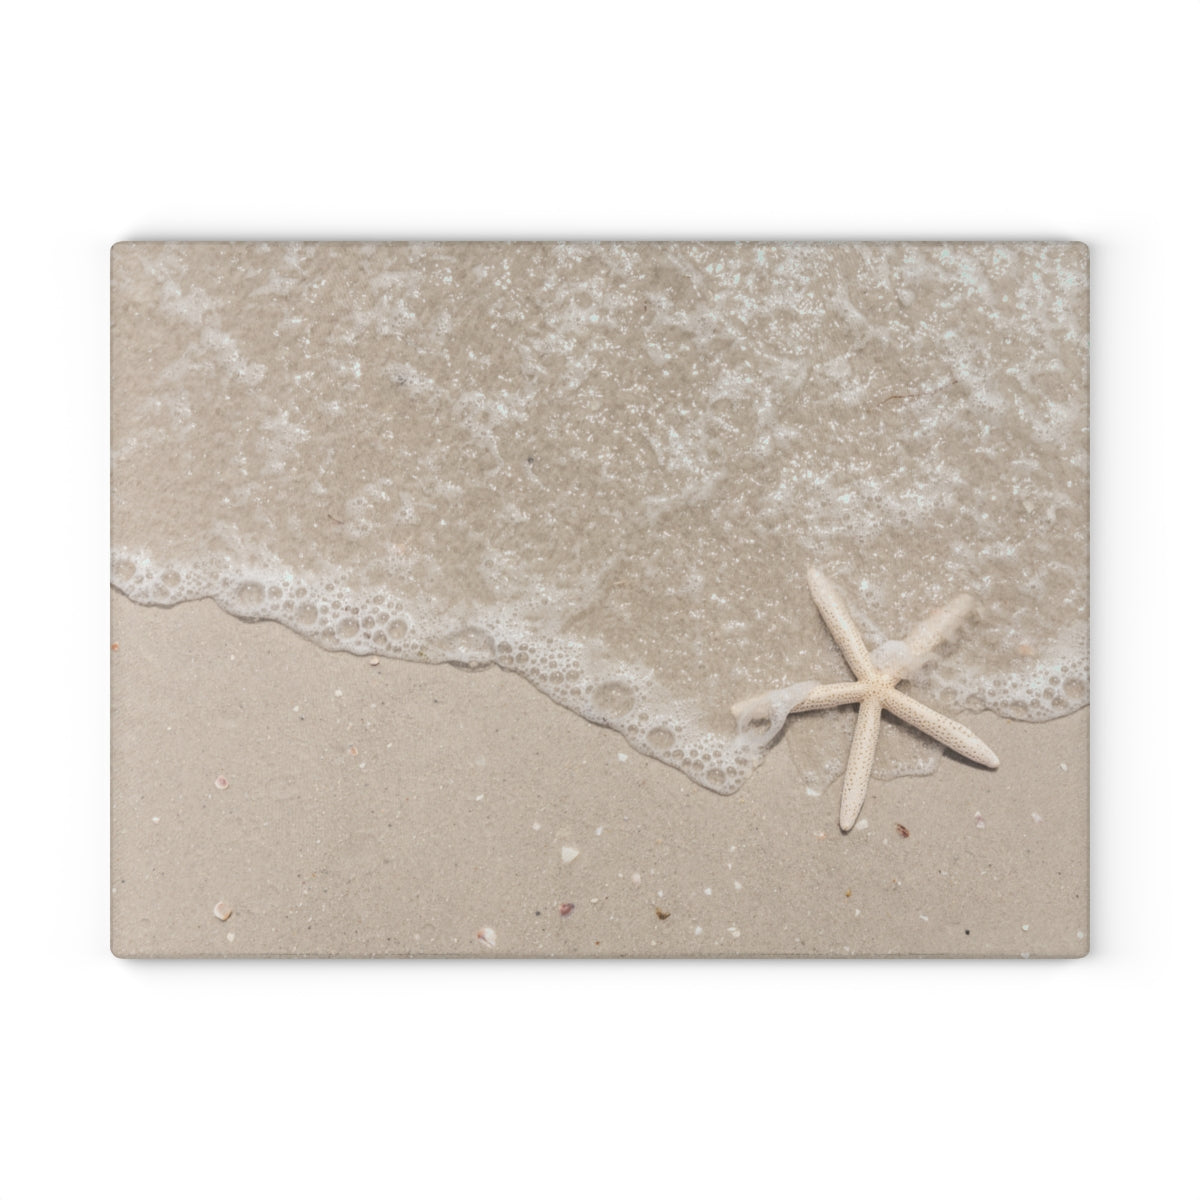 Glass Cutting Board, Sand and Starfish - Two Sizes Available1